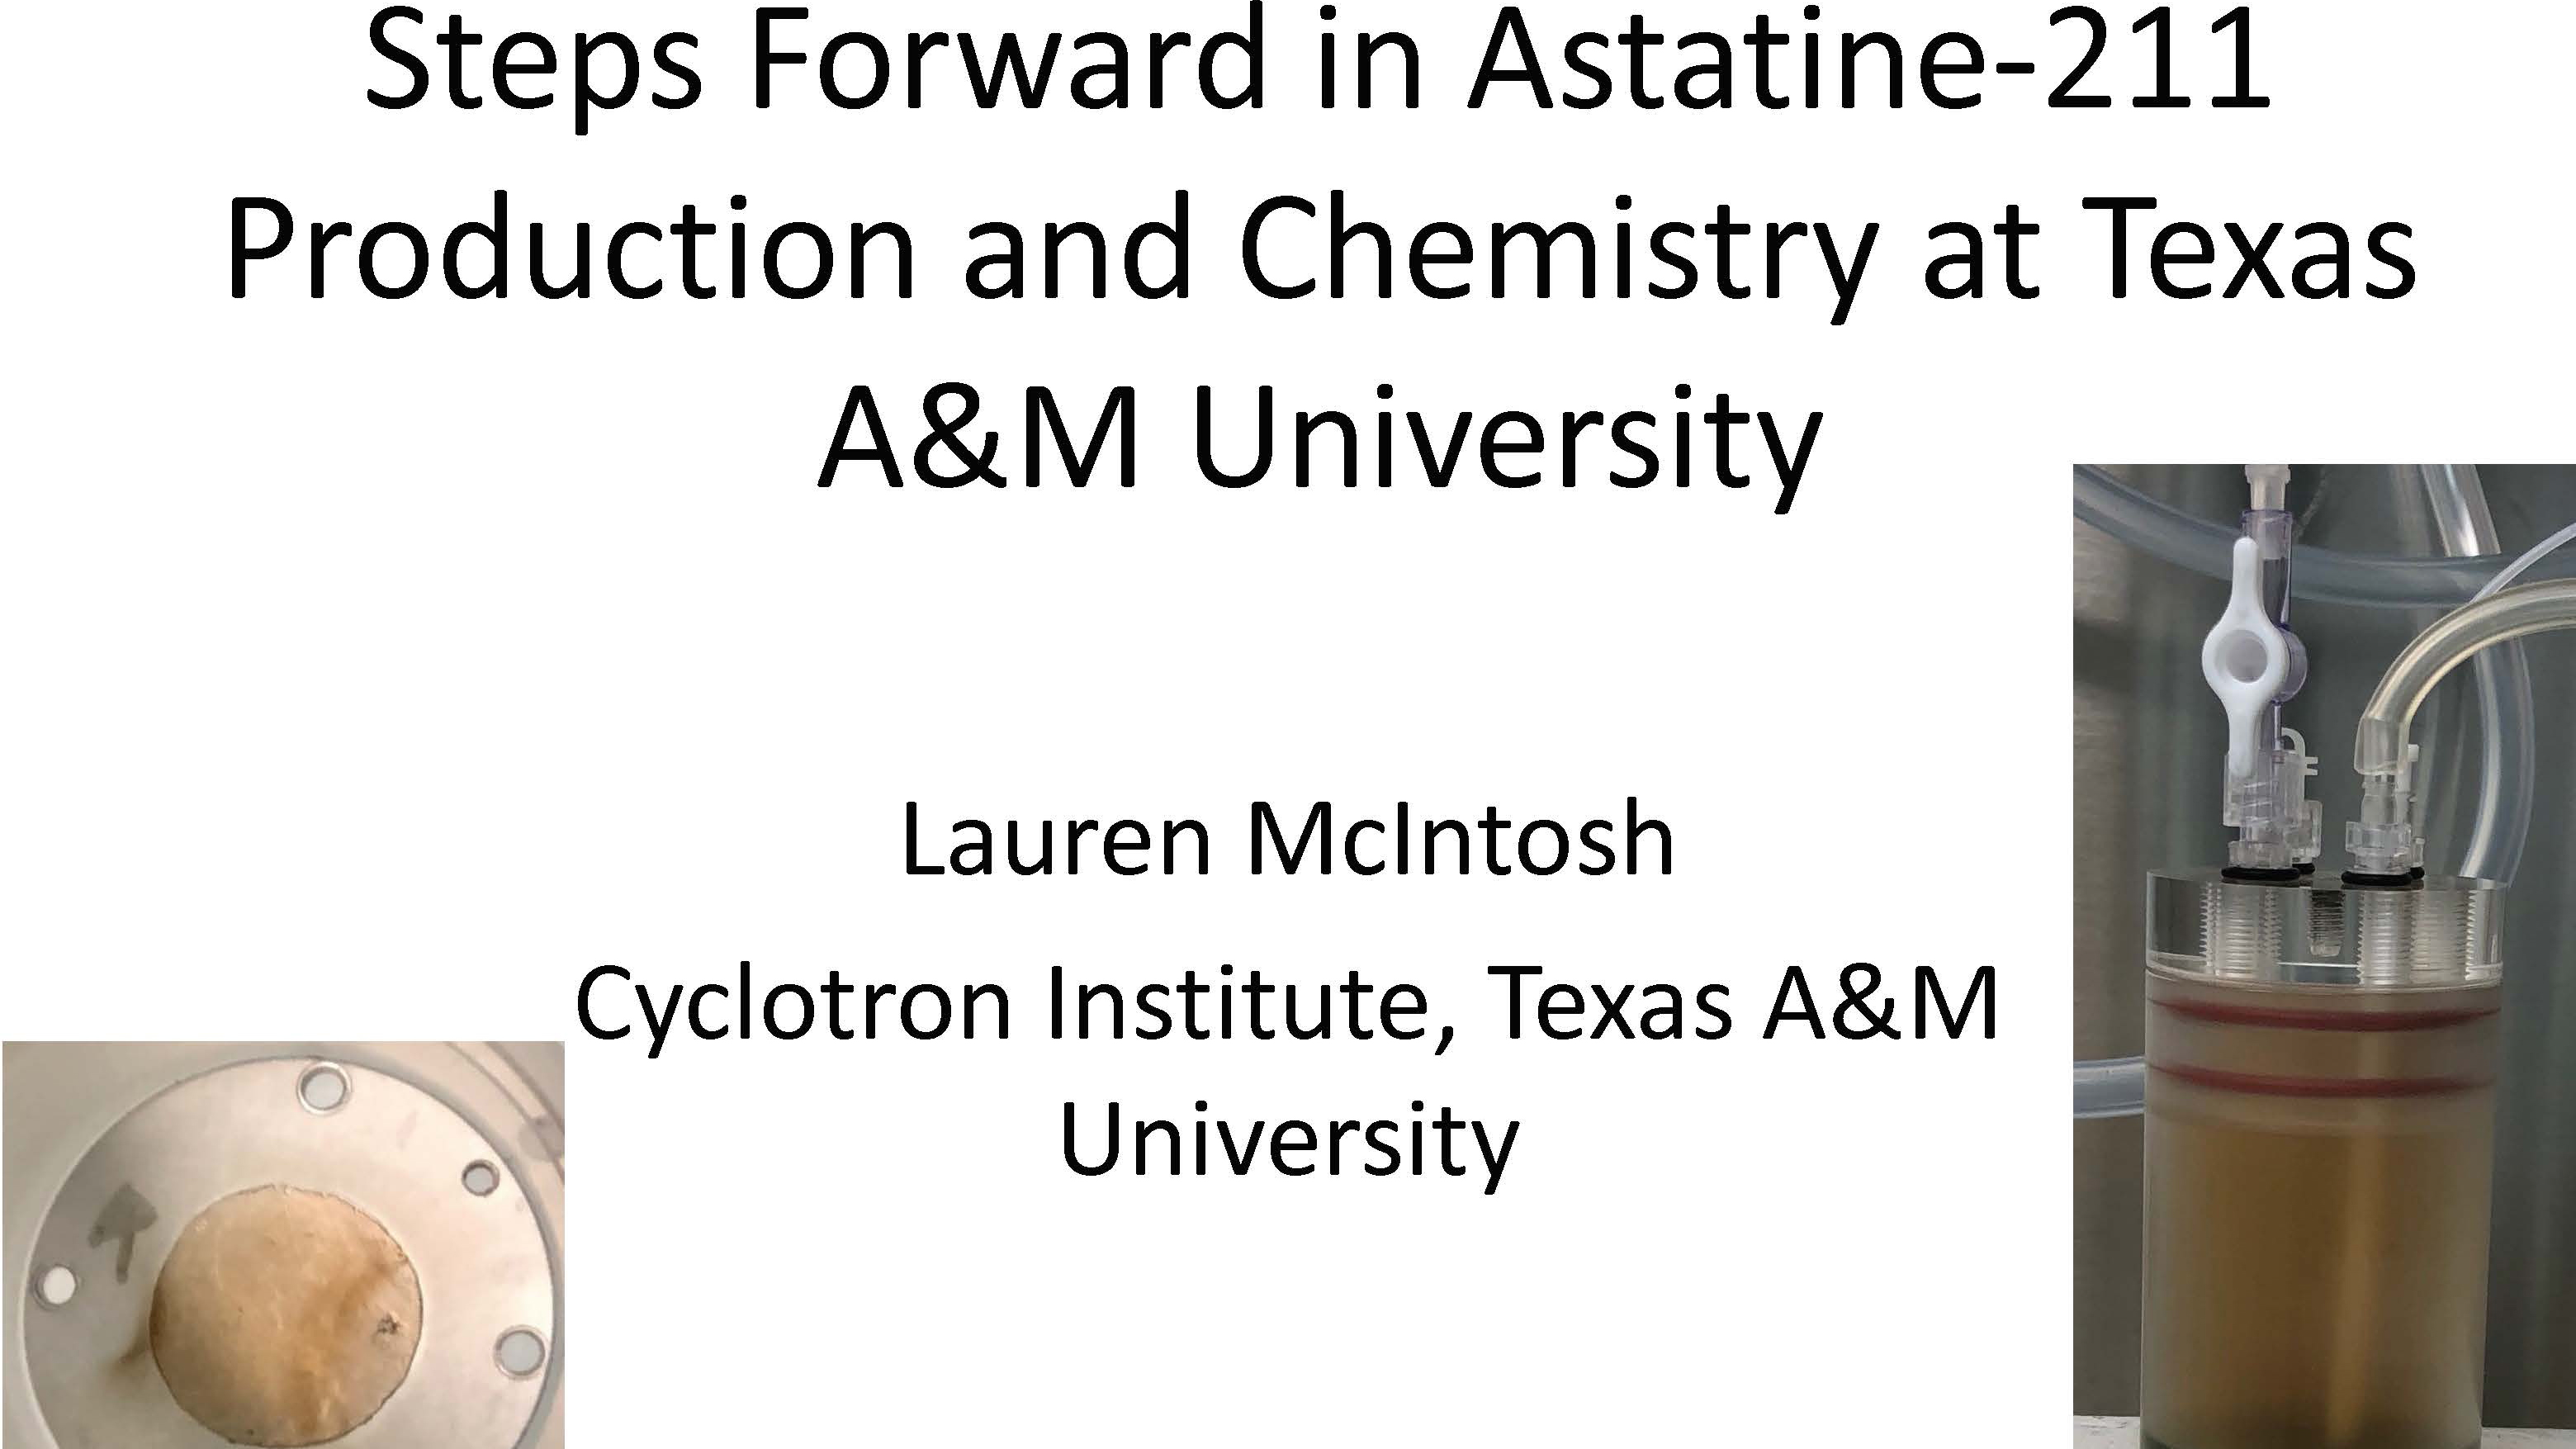 Steps Forward in At-211 Production and Chemistry at Texas A&M University by Dr. Lauren McIntosh, Texas A&M University